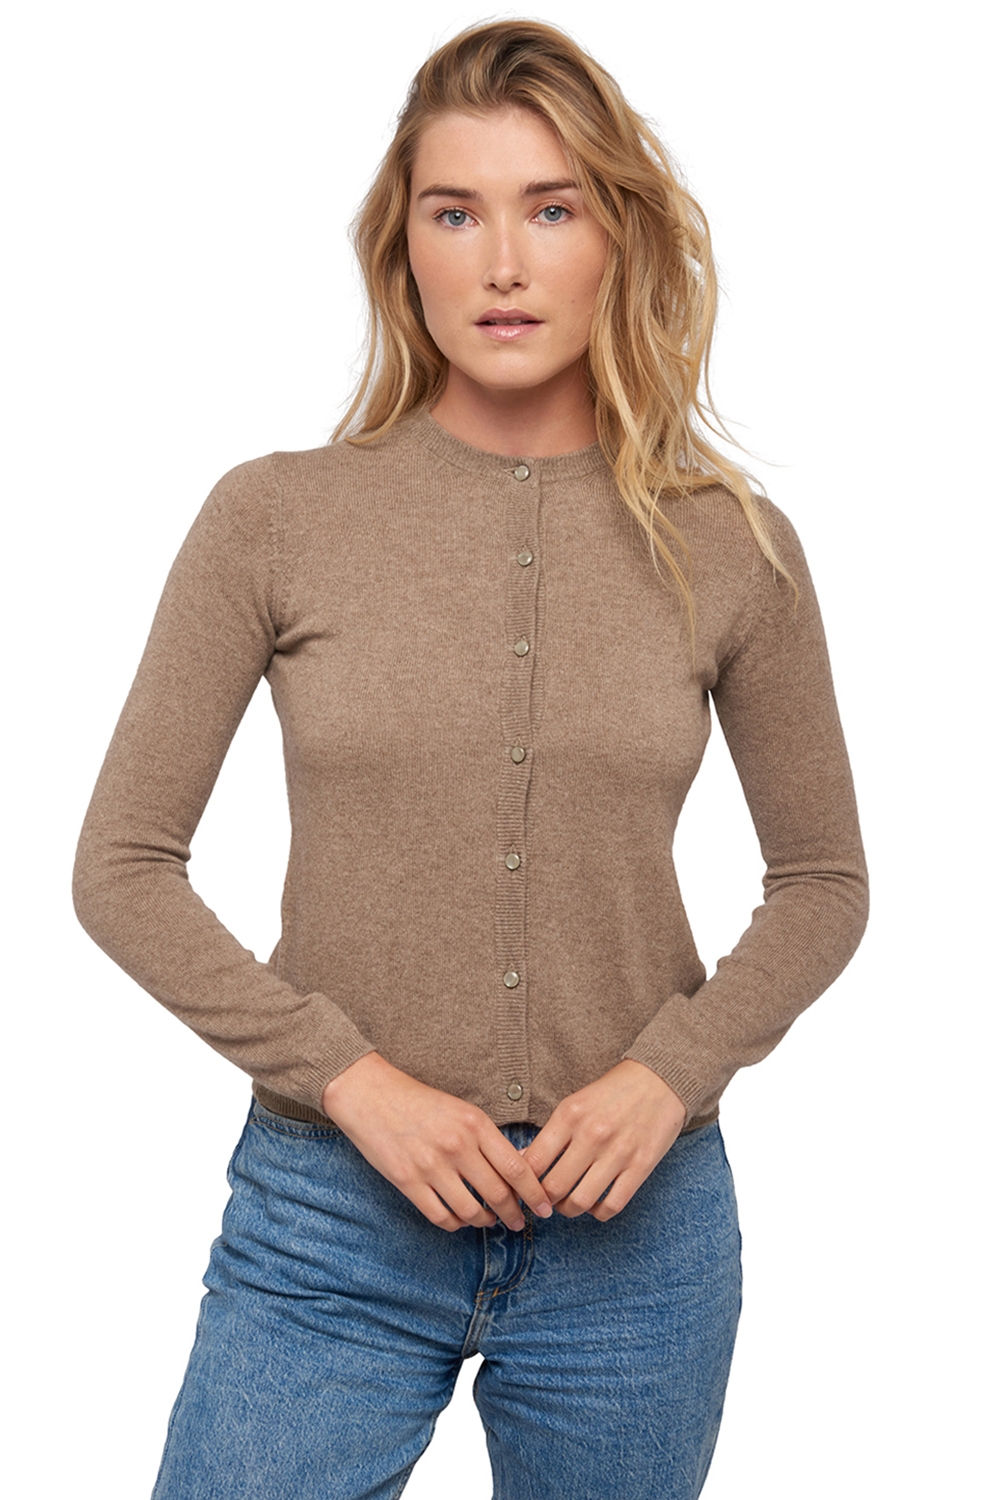 Cashmere ladies timeless classics chloe natural brown 3xl